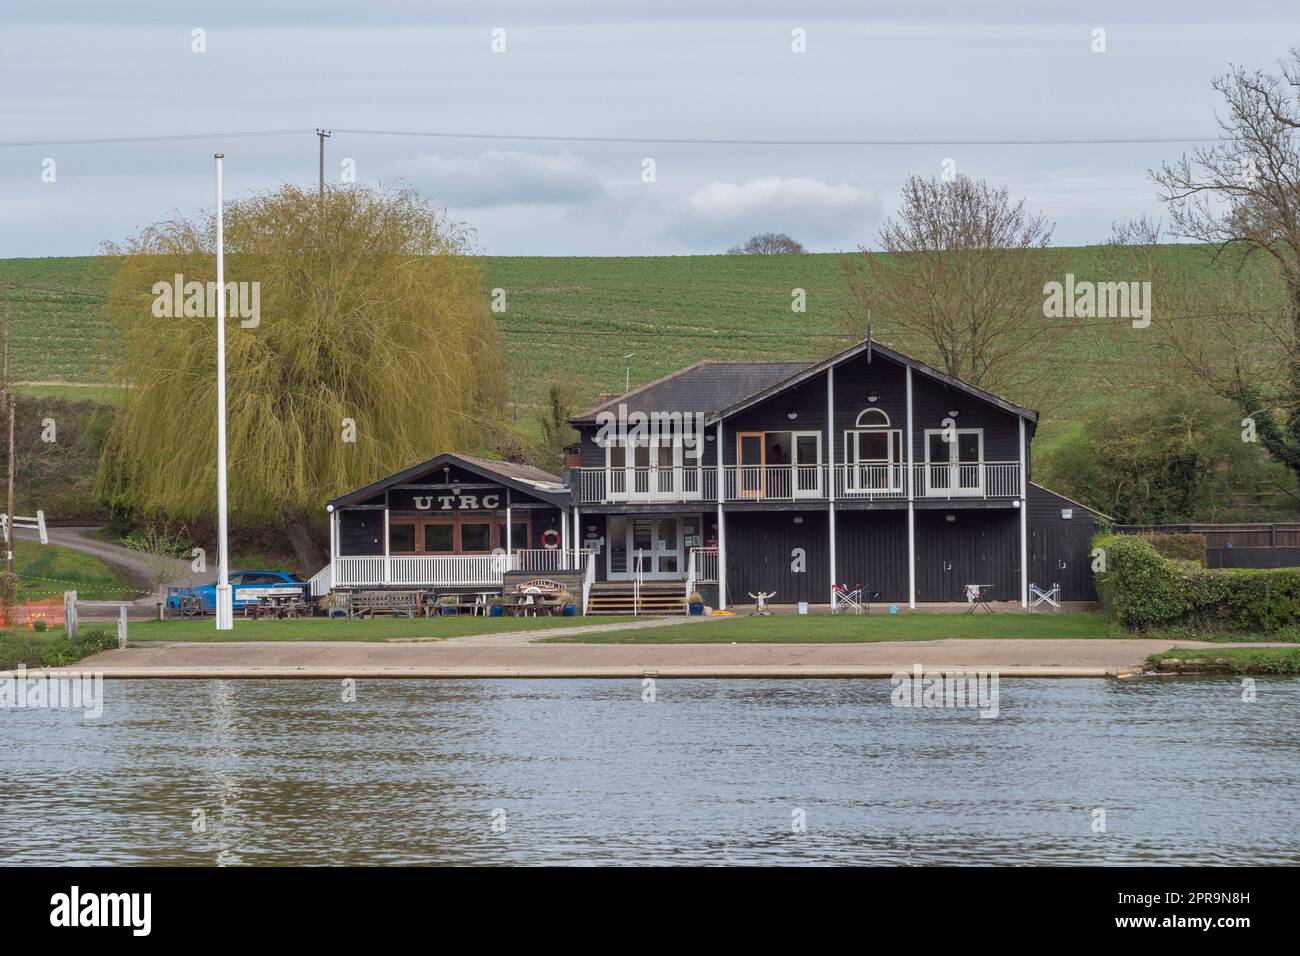 The Upper Thames Rowing Club (UPRC) clubhouse on the River Thames in Henley-On-Thames, Oxfordshire, England. Stock Photo